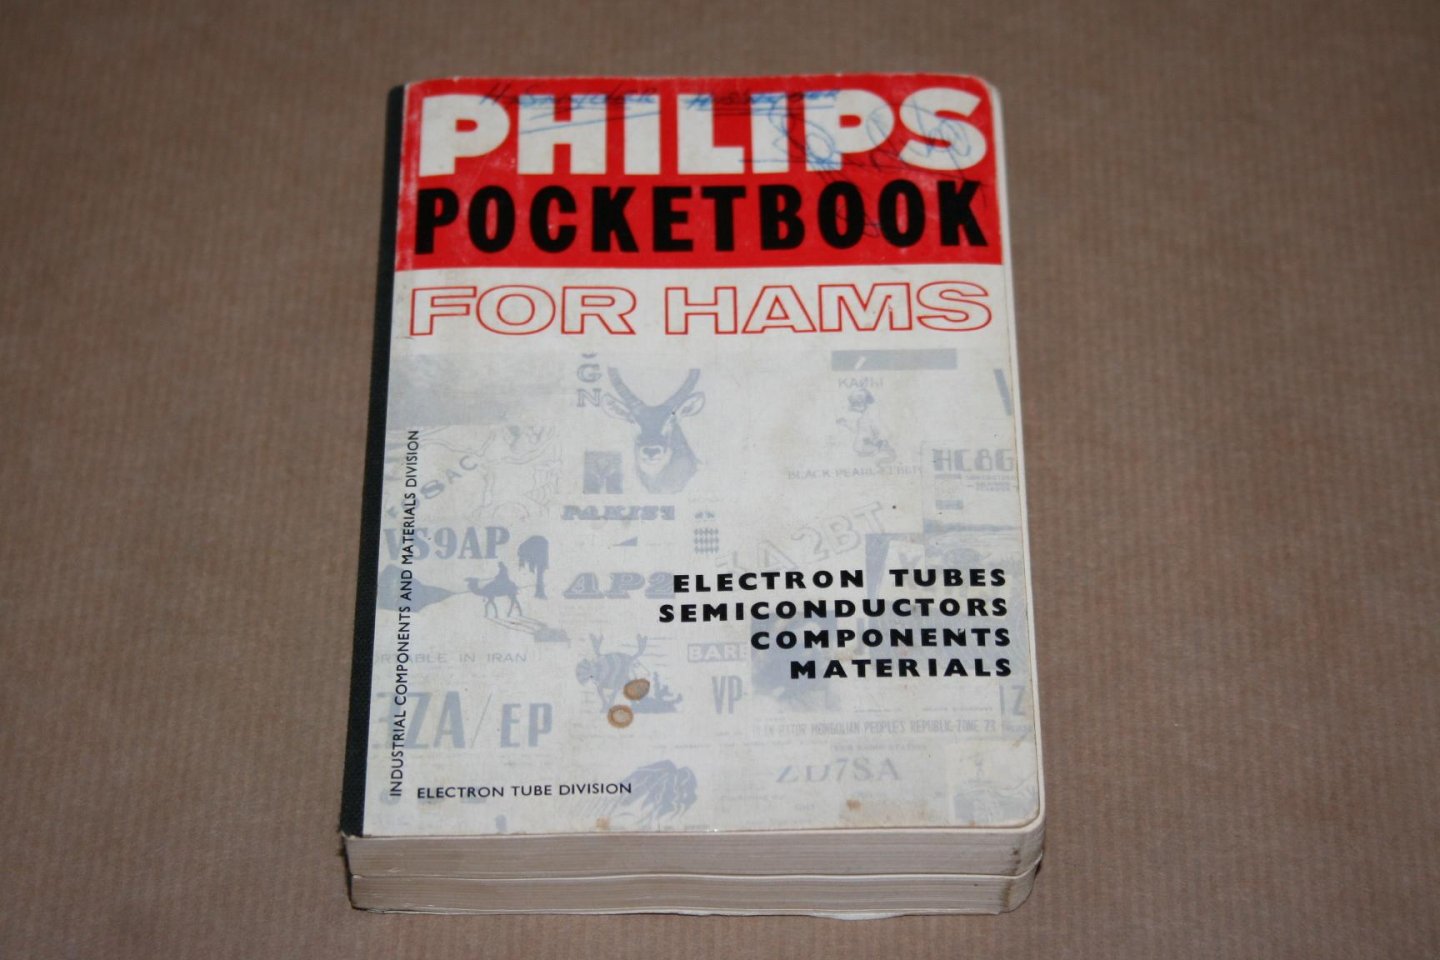  - Philips Pocketbook for Hams -- Electron Tubes - Semiconductors - Componenst - Materials